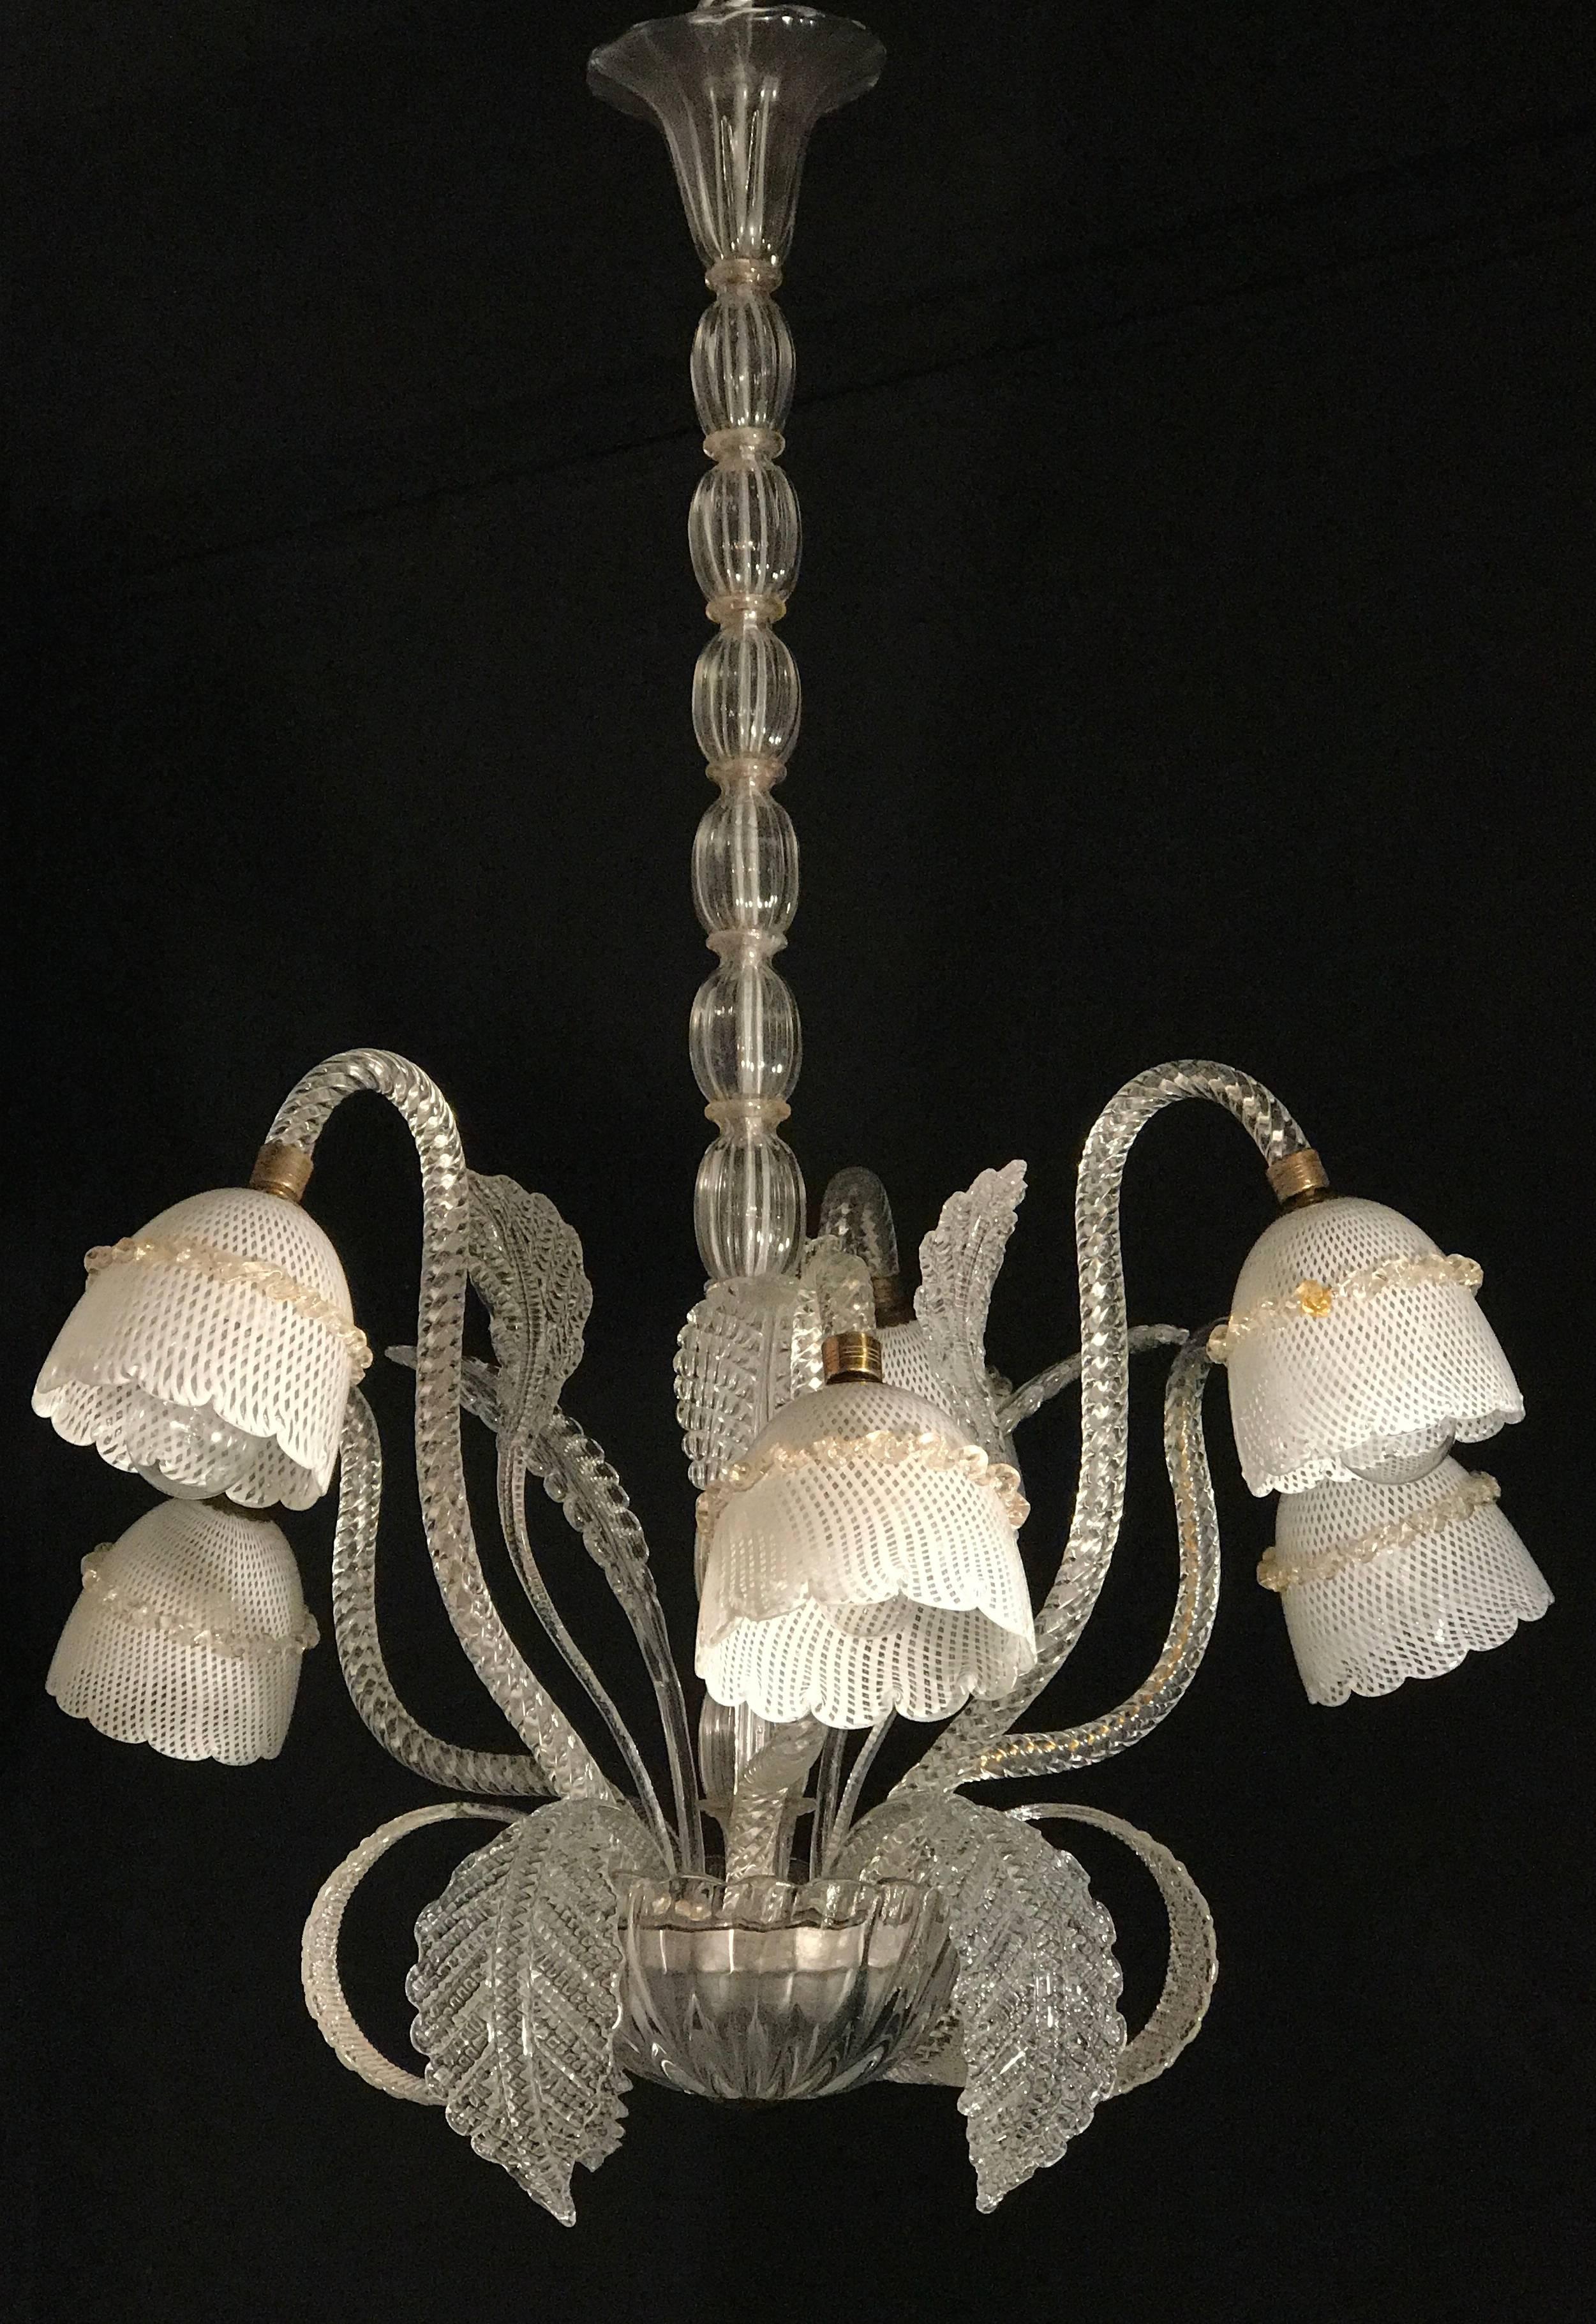 Exquisite craftsmanship with six arms supporting handblown 'reticello' cups. Perfect vintage condition.
We can rewire for US standards. Six e27 light bulbs.